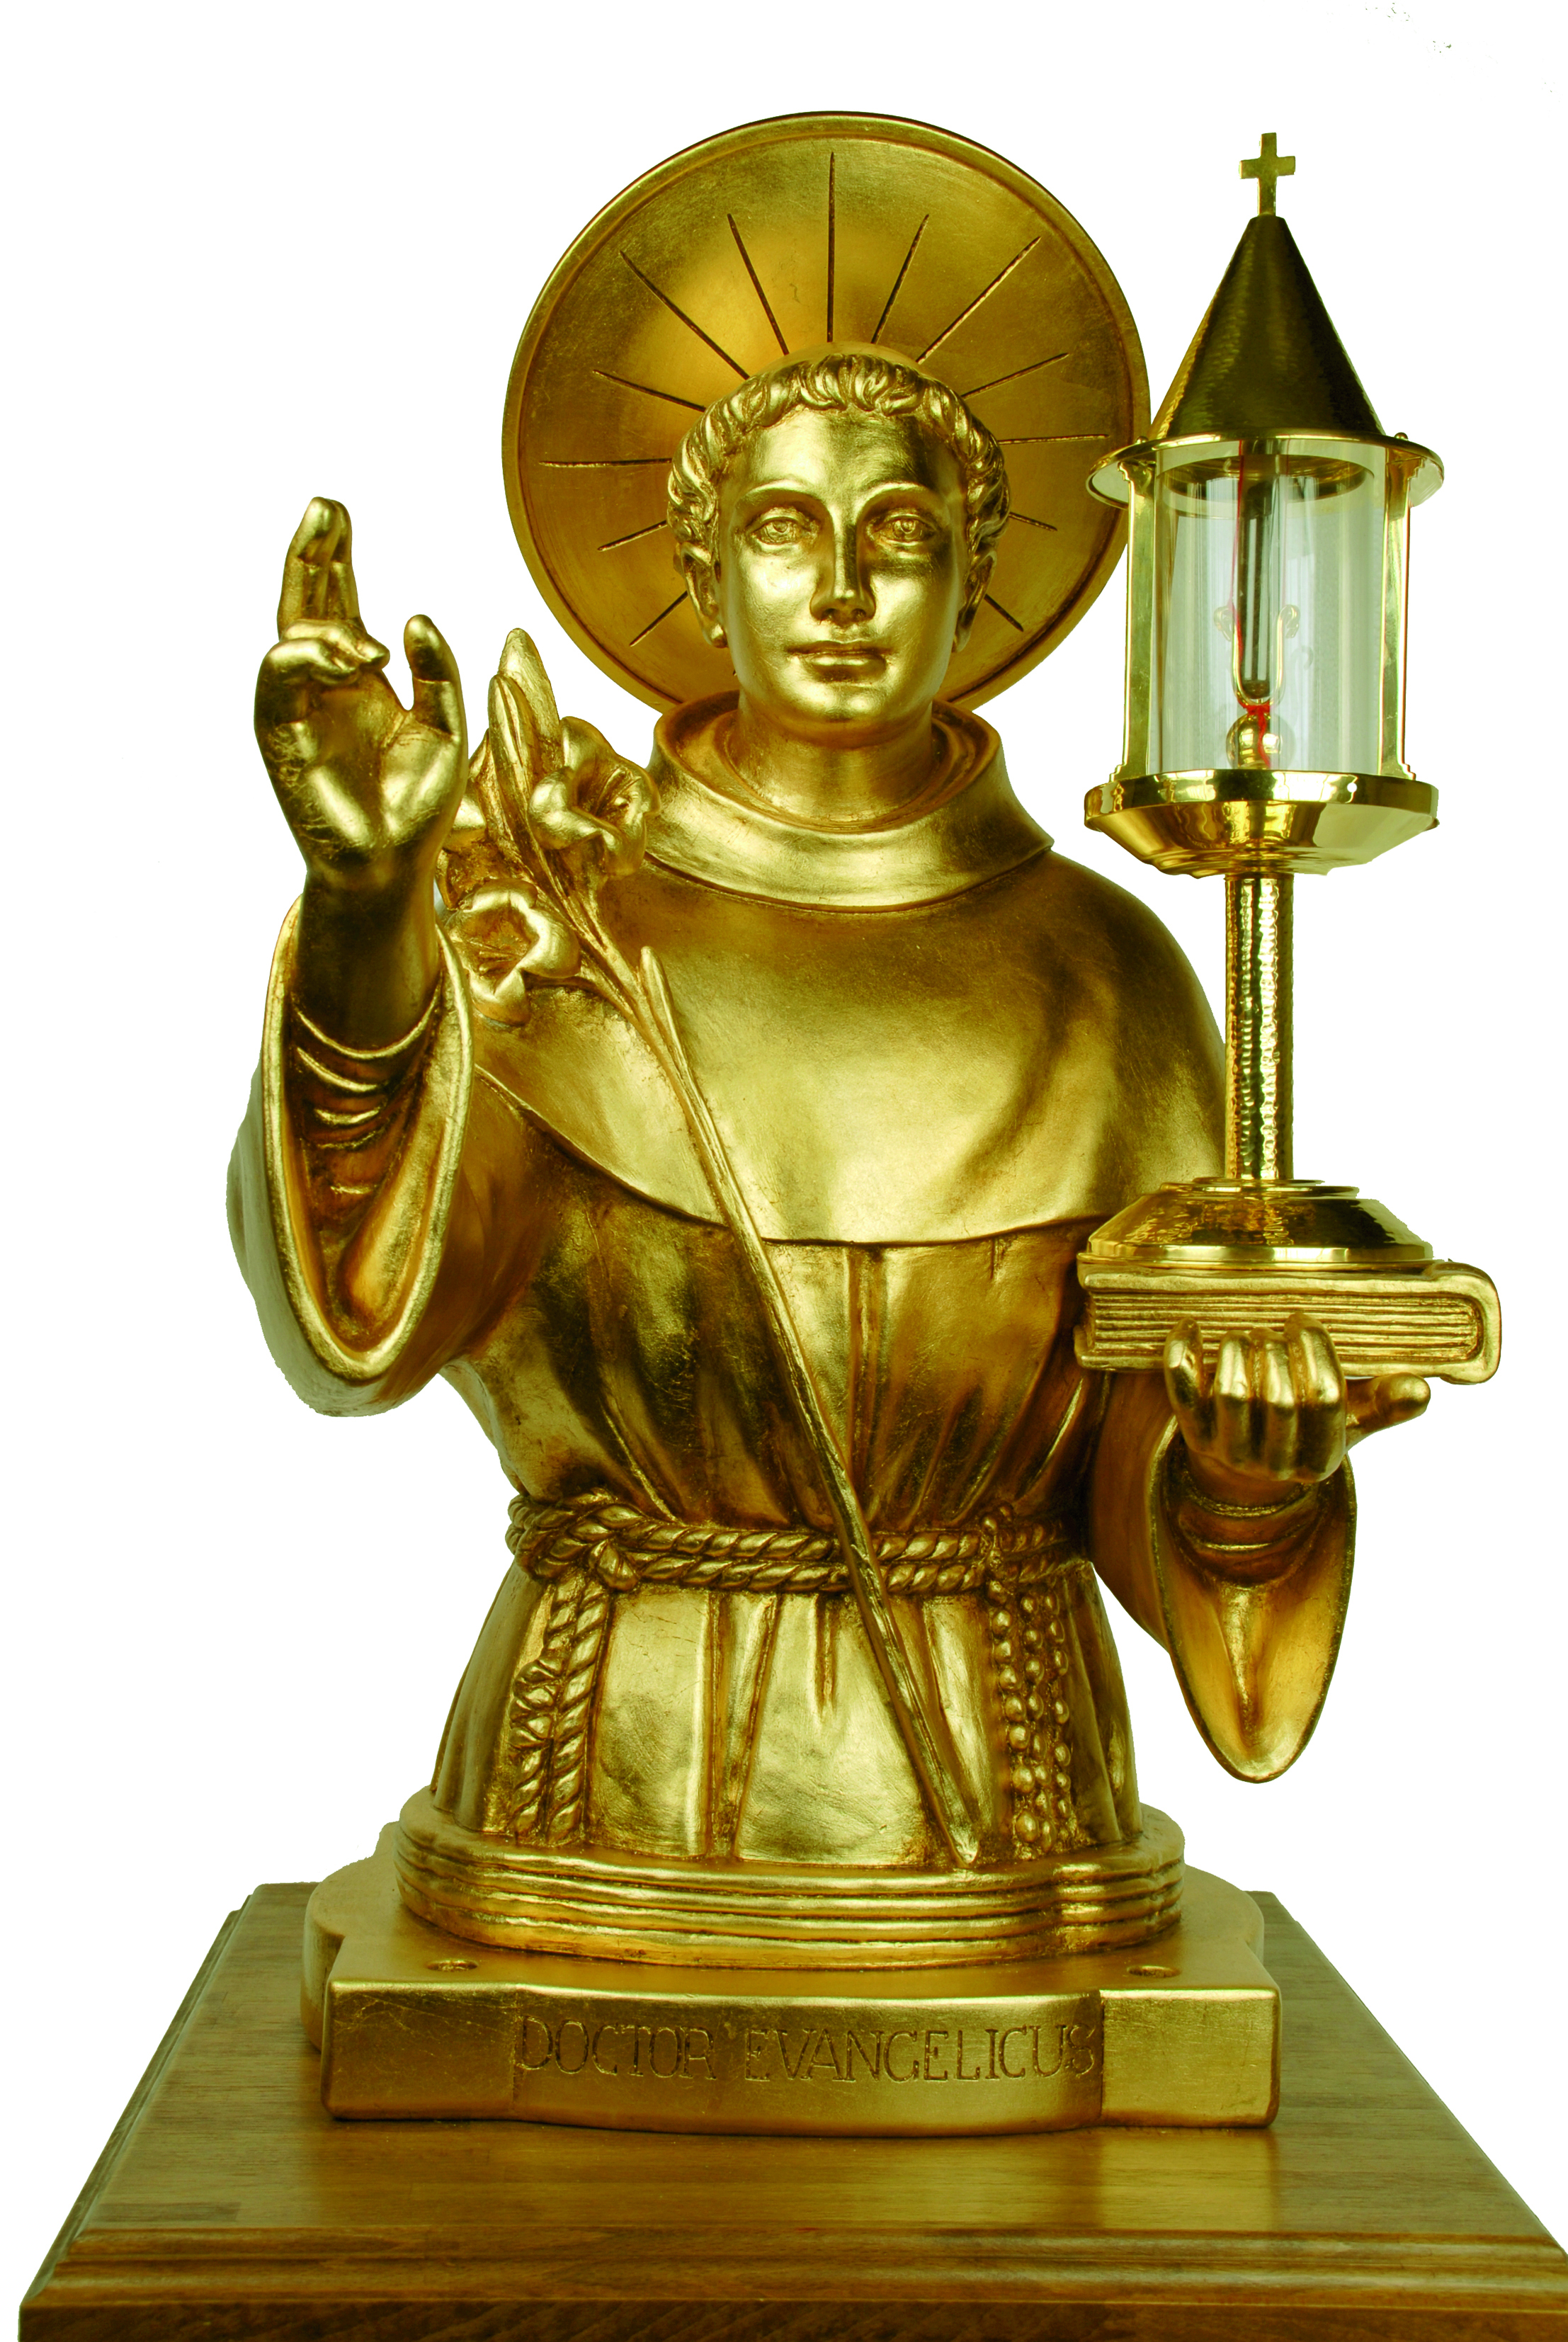 St Anthony of Padua’s relics are on the way